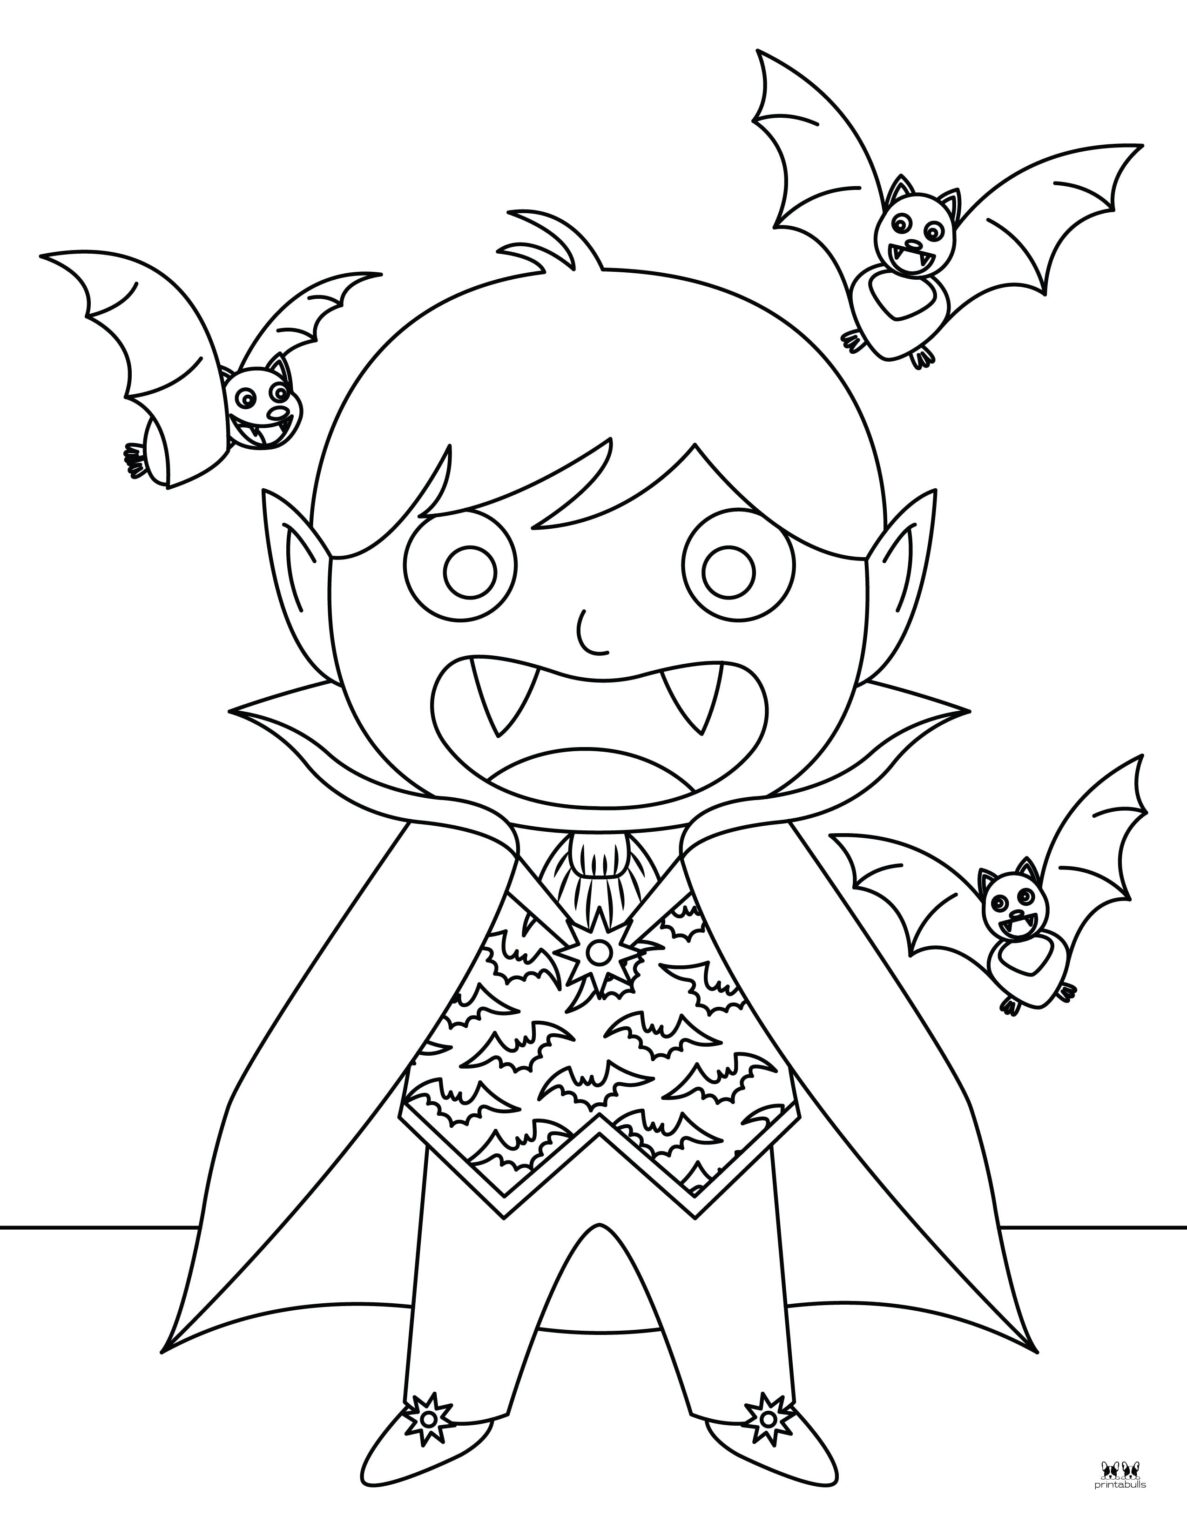 Vampire Coloring Pages & Outlines - 26 FREE Pages | Printabulls